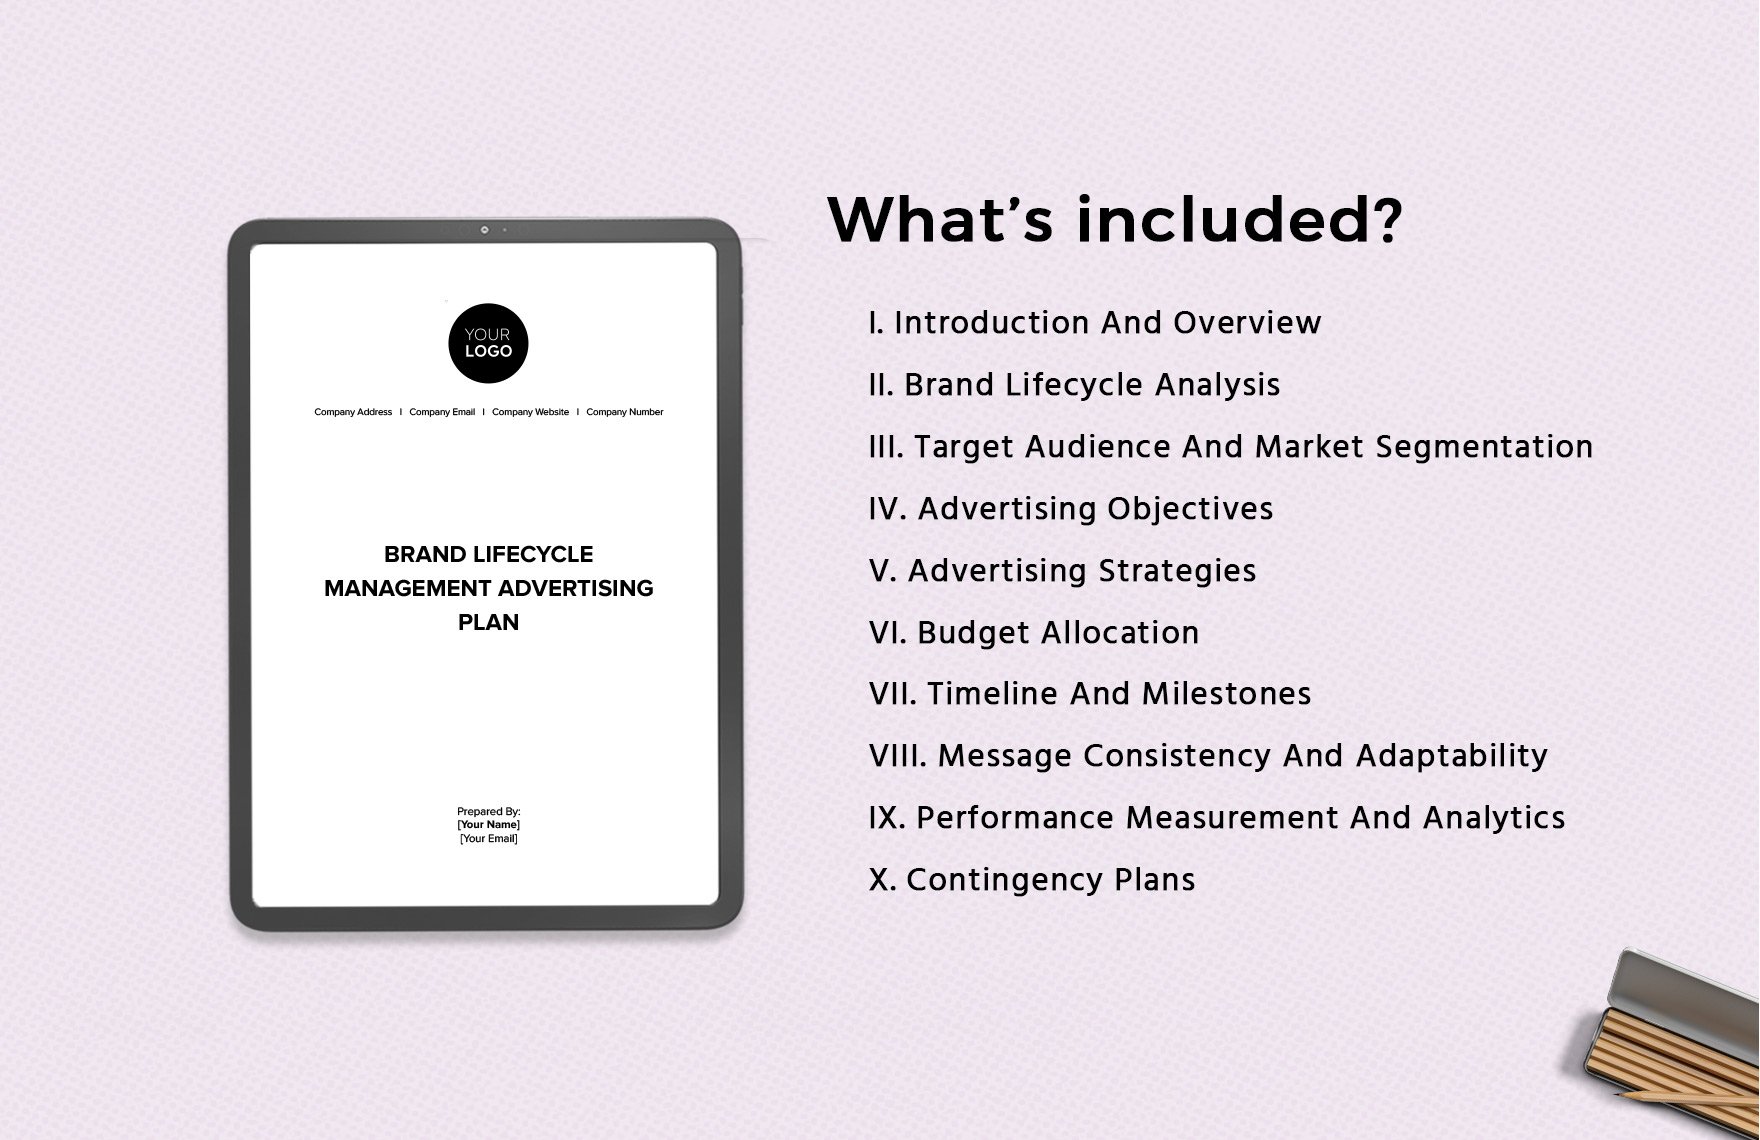 Brand Lifecycle Management Advertising Plan Template